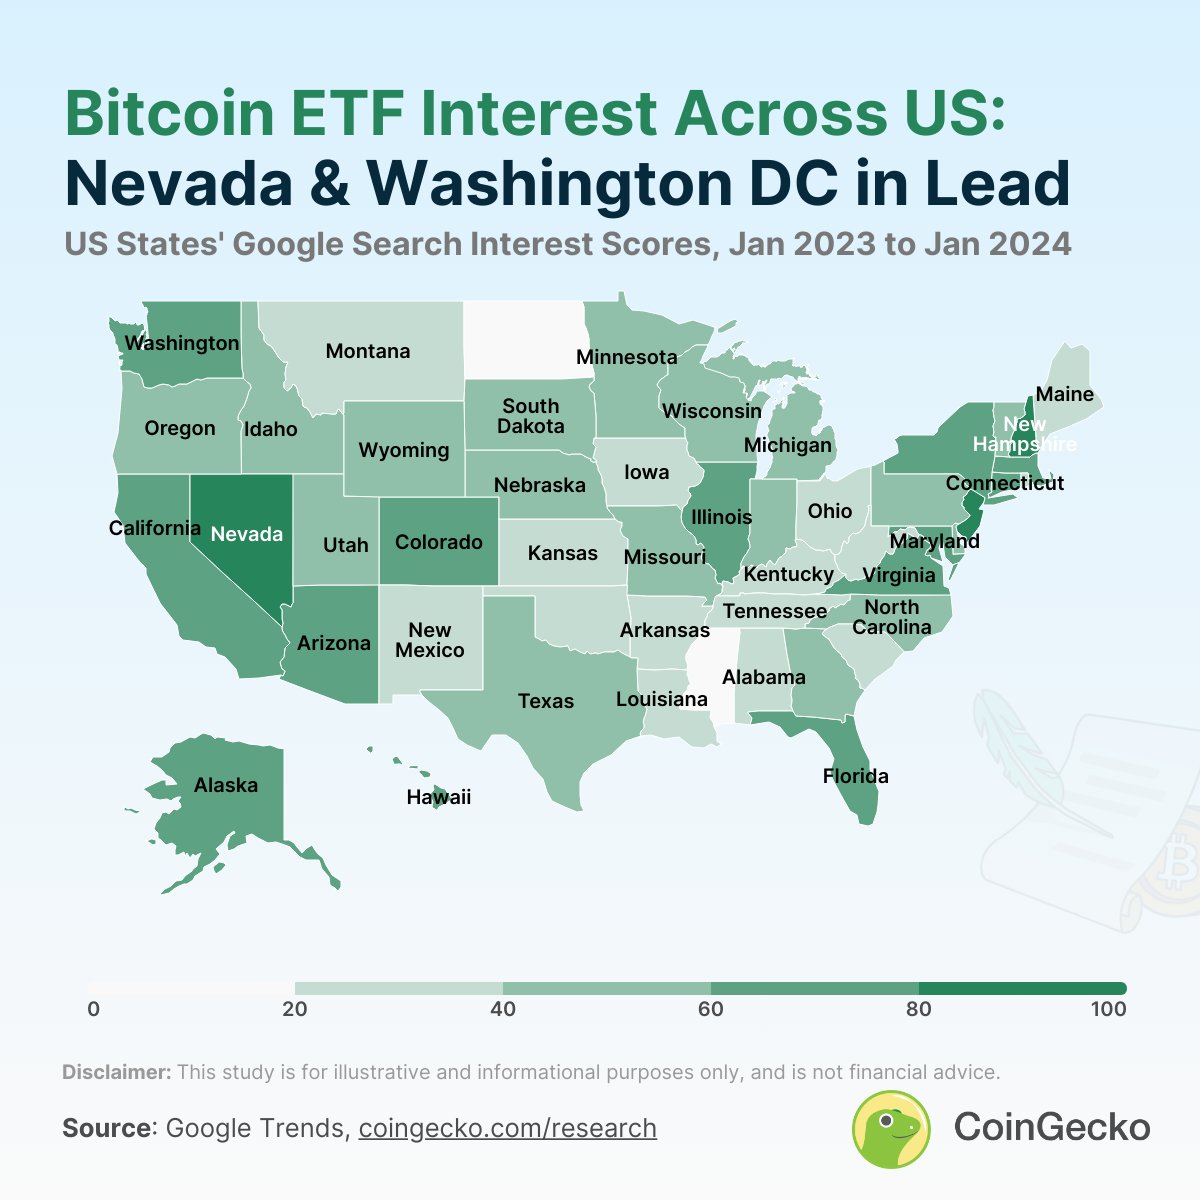 1/ Which states in the US are most interested in Bitcoin ETFs? Our study shows that Nevada, which is home to the gambling city of Las Vegas, is the most interested in Bitcoin ETFs. Read the full study: gcko.io/6kjxcqw